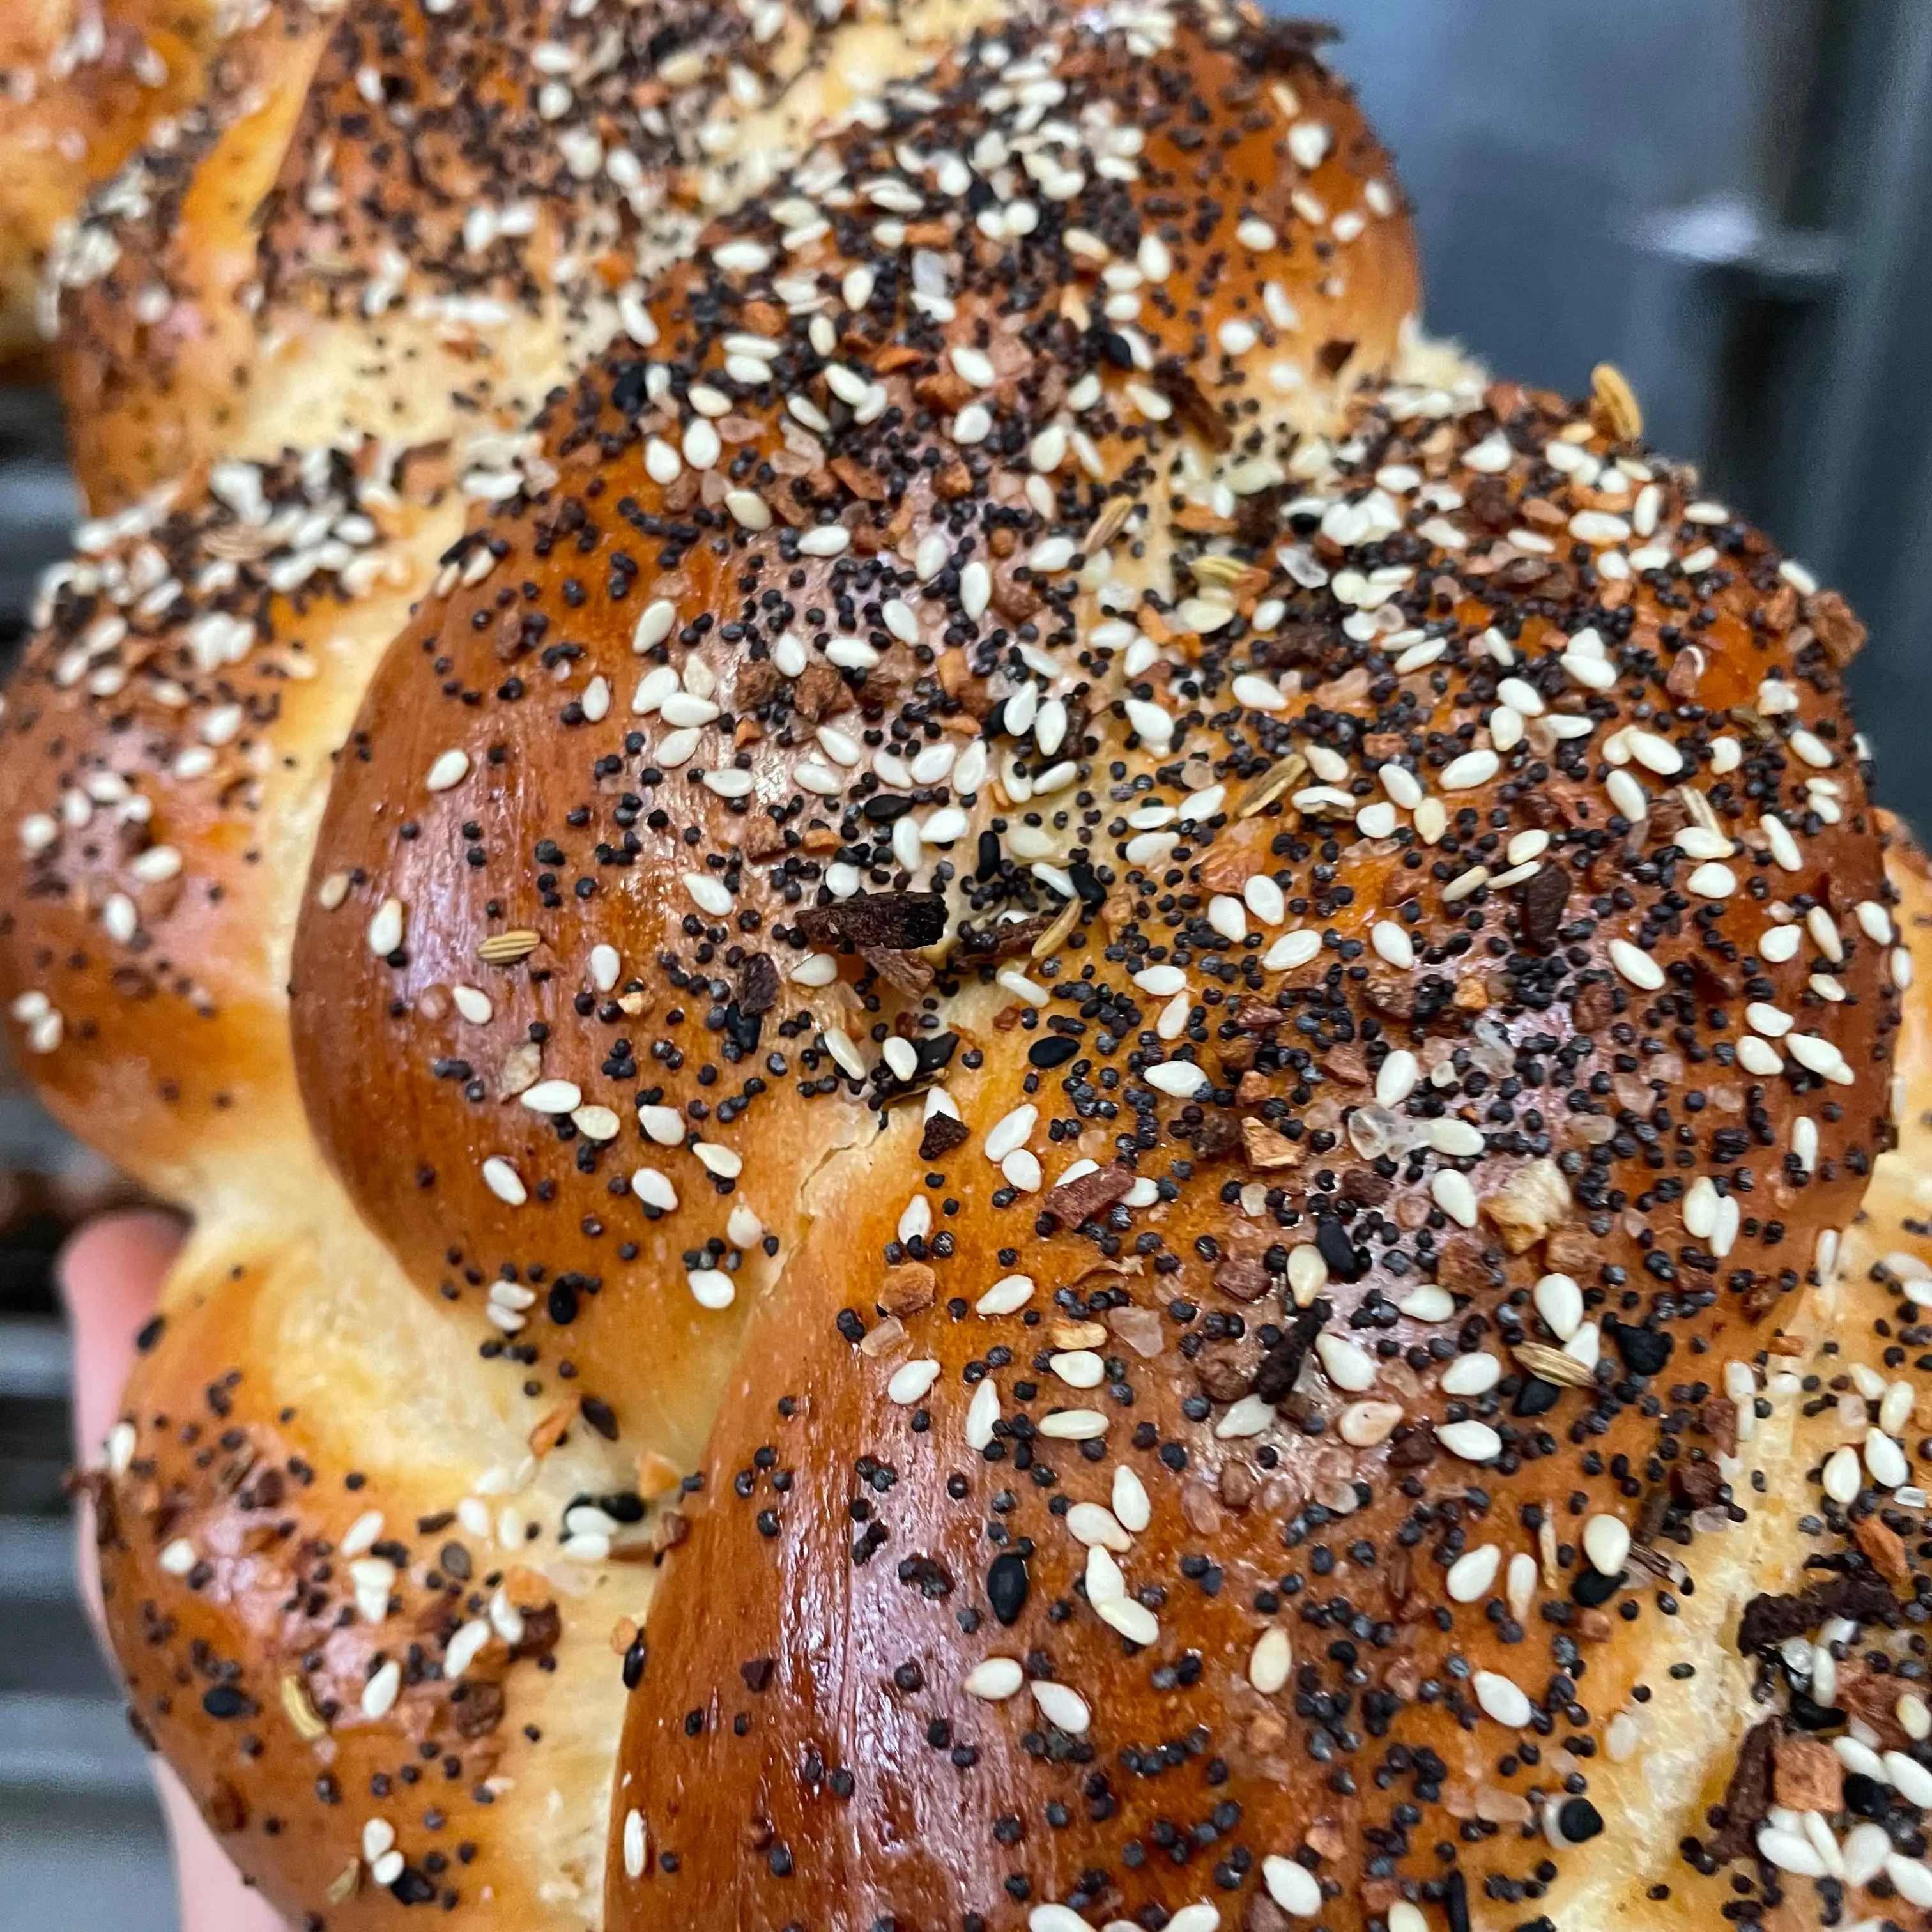 The Funcle Challah Delivery